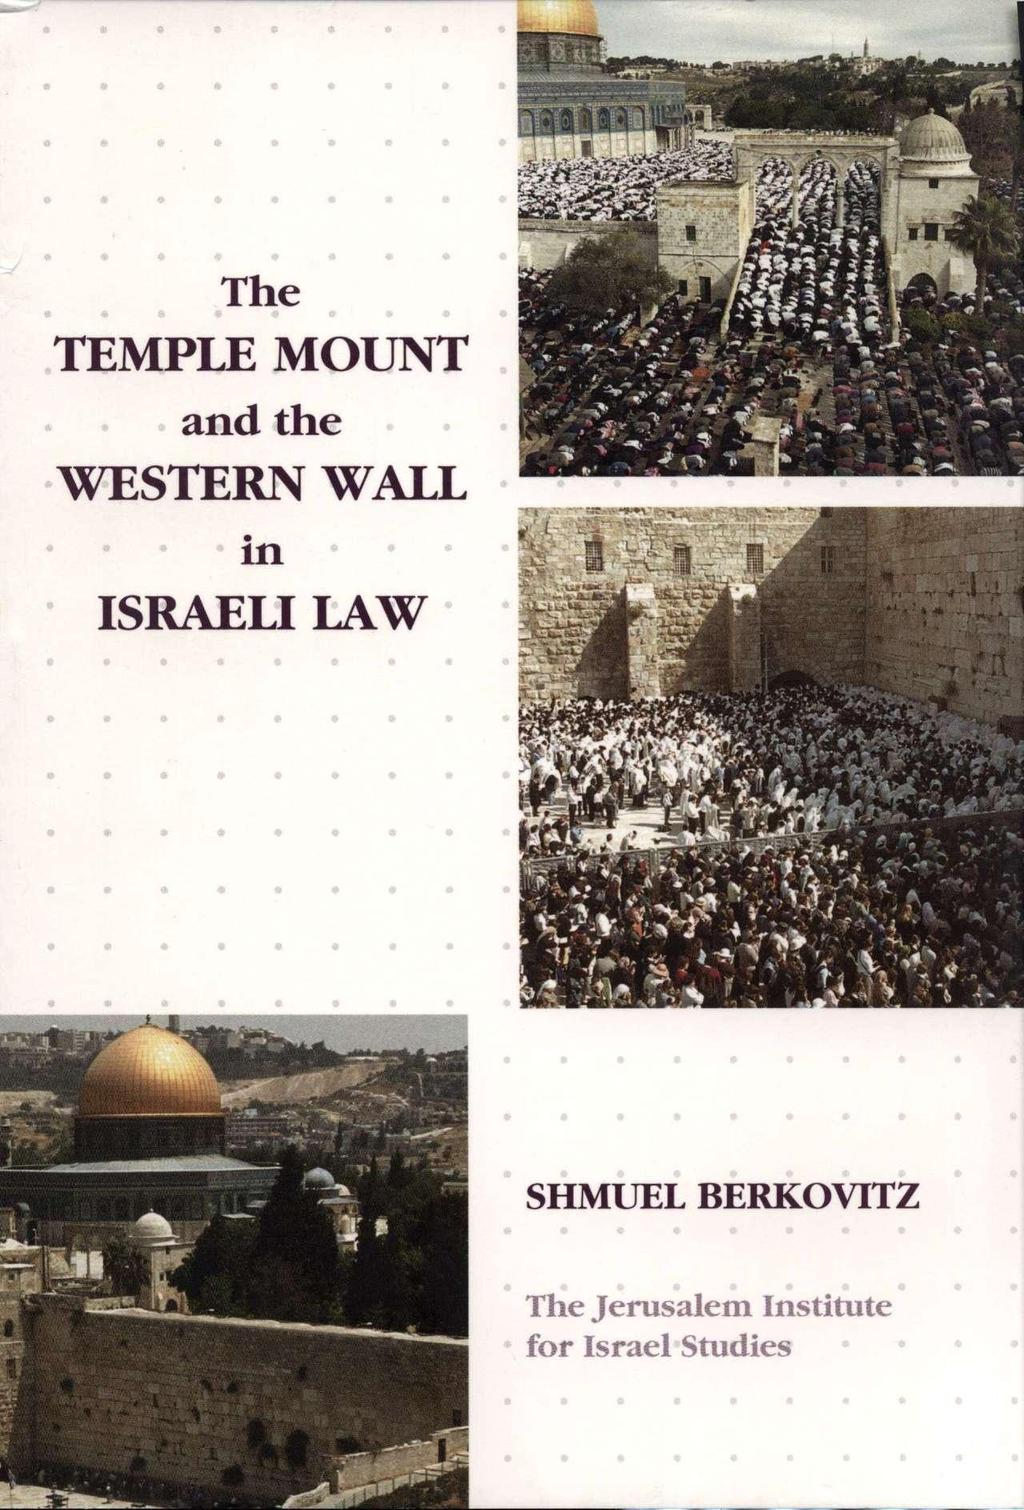 The TEMPLE MOUNT and the WESTERN WALL ISRAELI LAW #